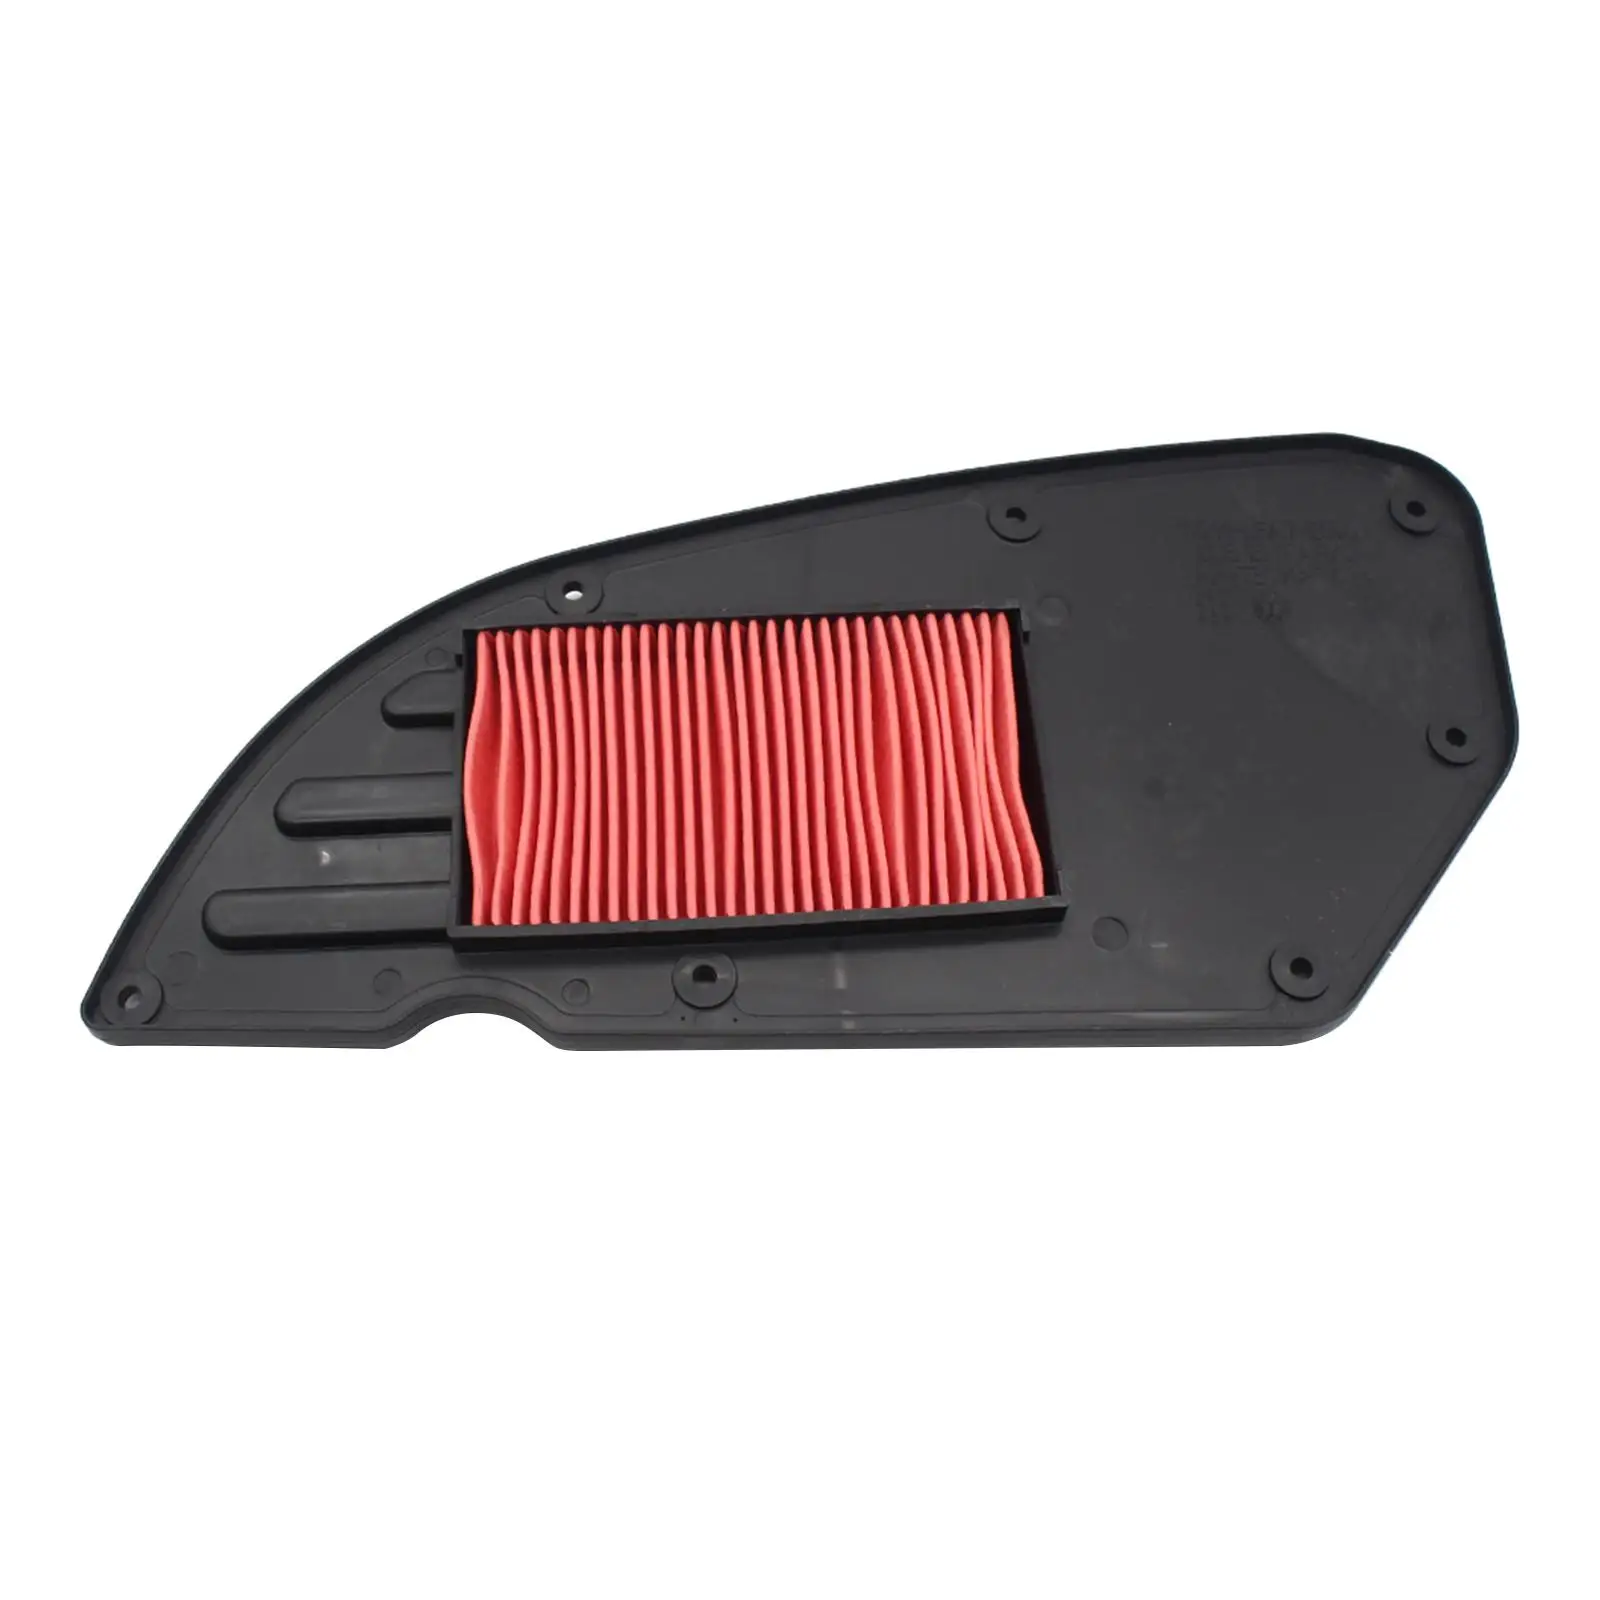 Motorcycle Air Filter Fit for Kymco Downtown 300 300i 09-16 17211-Lkg7-E00 Replacement